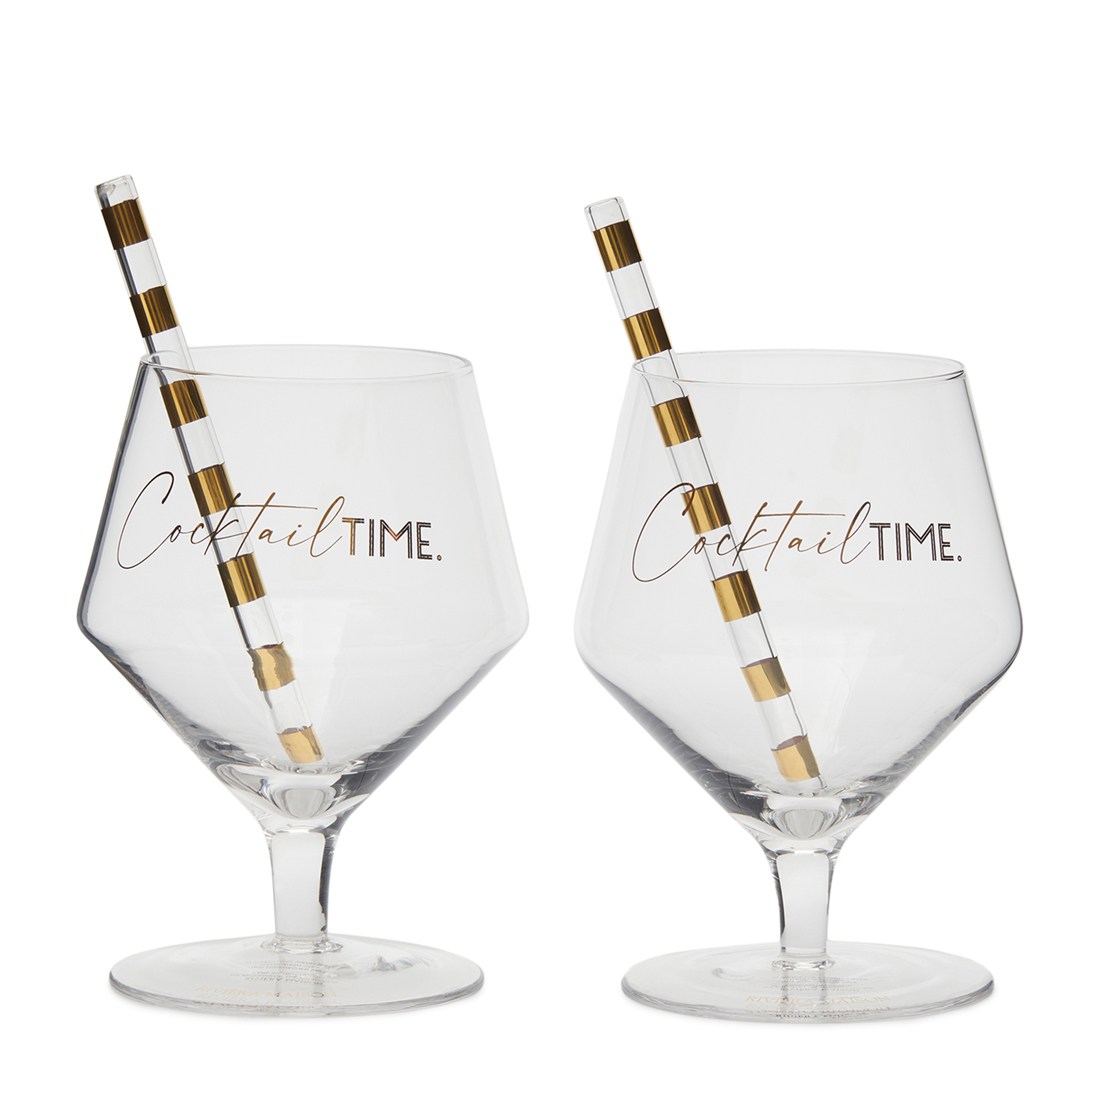 Riviera Maison Cocktail coupe - Cocktail Time Glass & Straw - Transparant - 2 Stuks